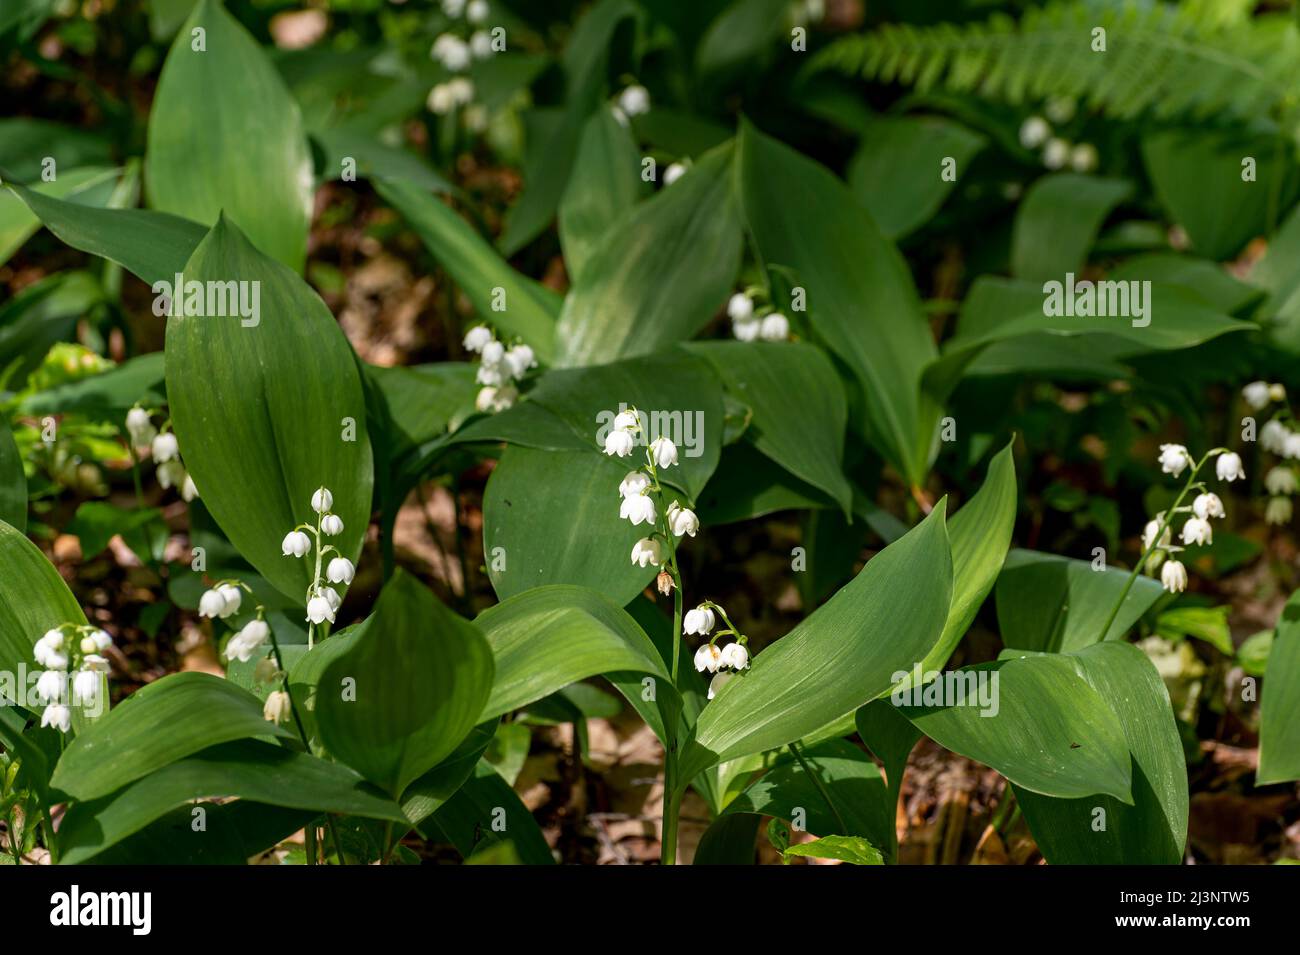 Bed of wild lily of the valley flowers. In Alsace, on May 1st, walkers pick the pretty little white bells in the forest. Stock Photo